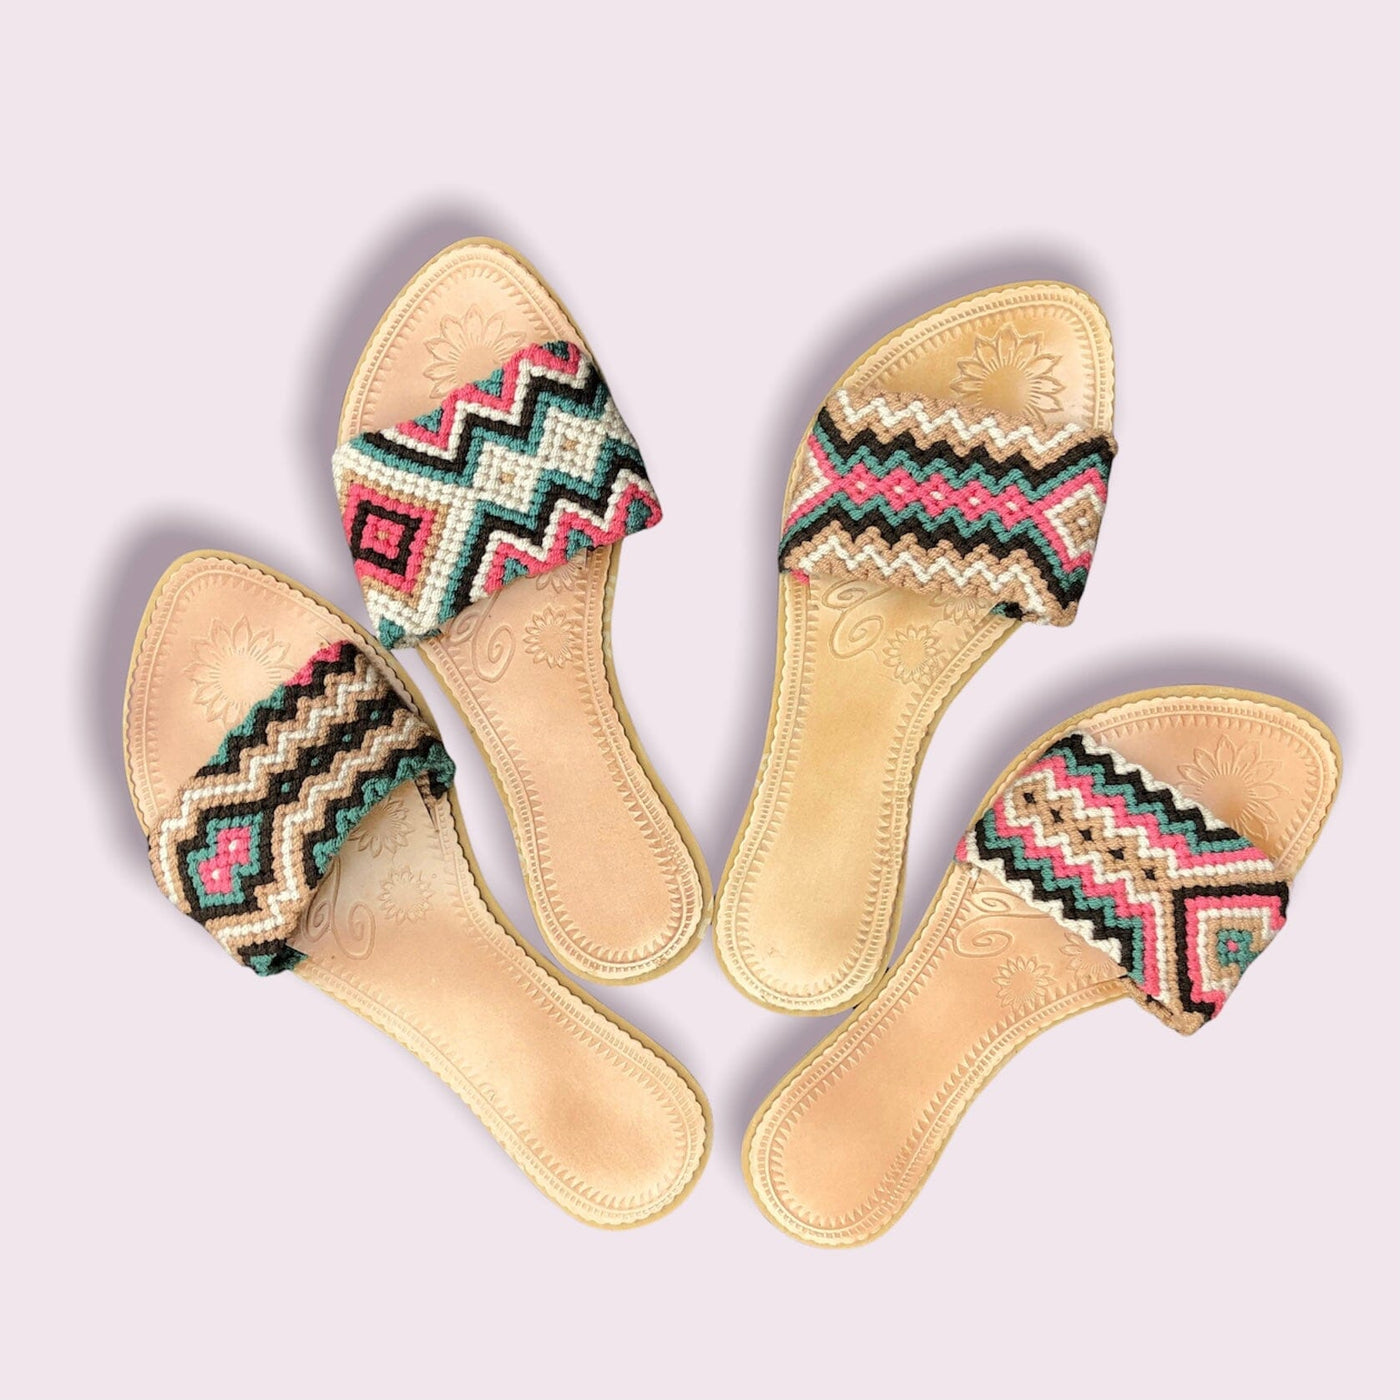 Cute Summer Sandals for women | Earth Tones Woven Sandals | Colorful4U